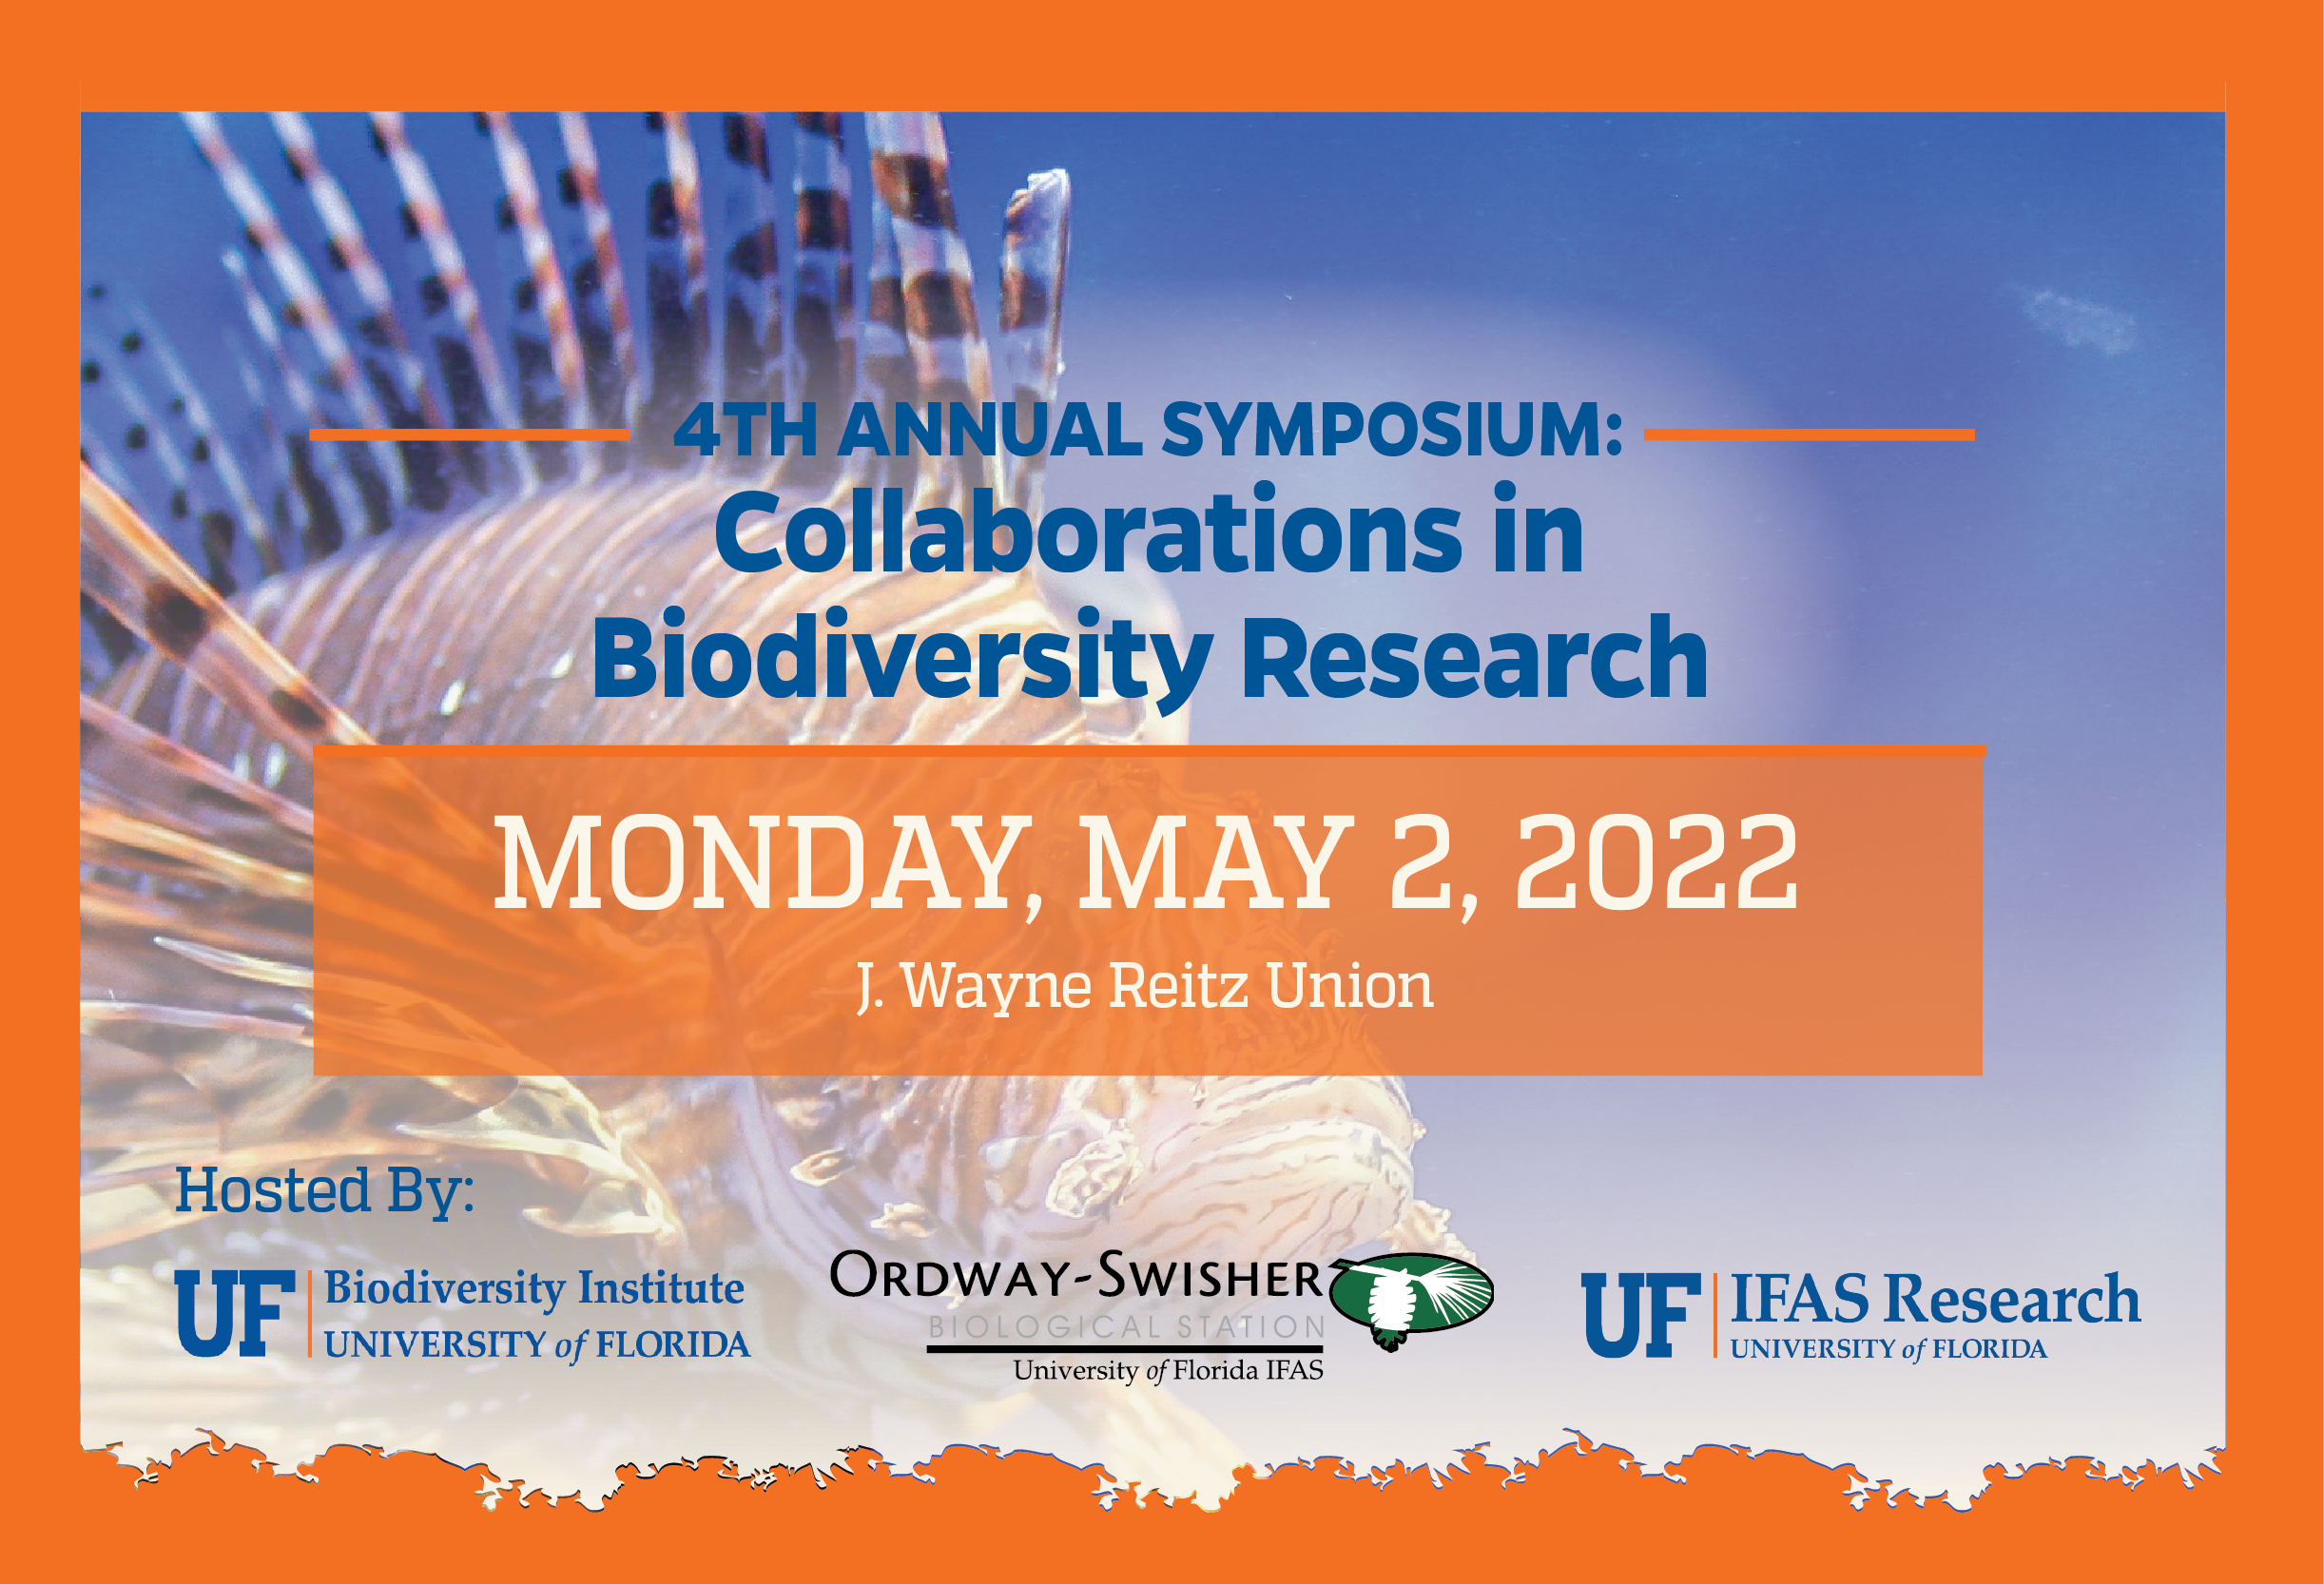 The 4th Annual Symposium: Collaborations in Biodiversity Research on May 2, 2022